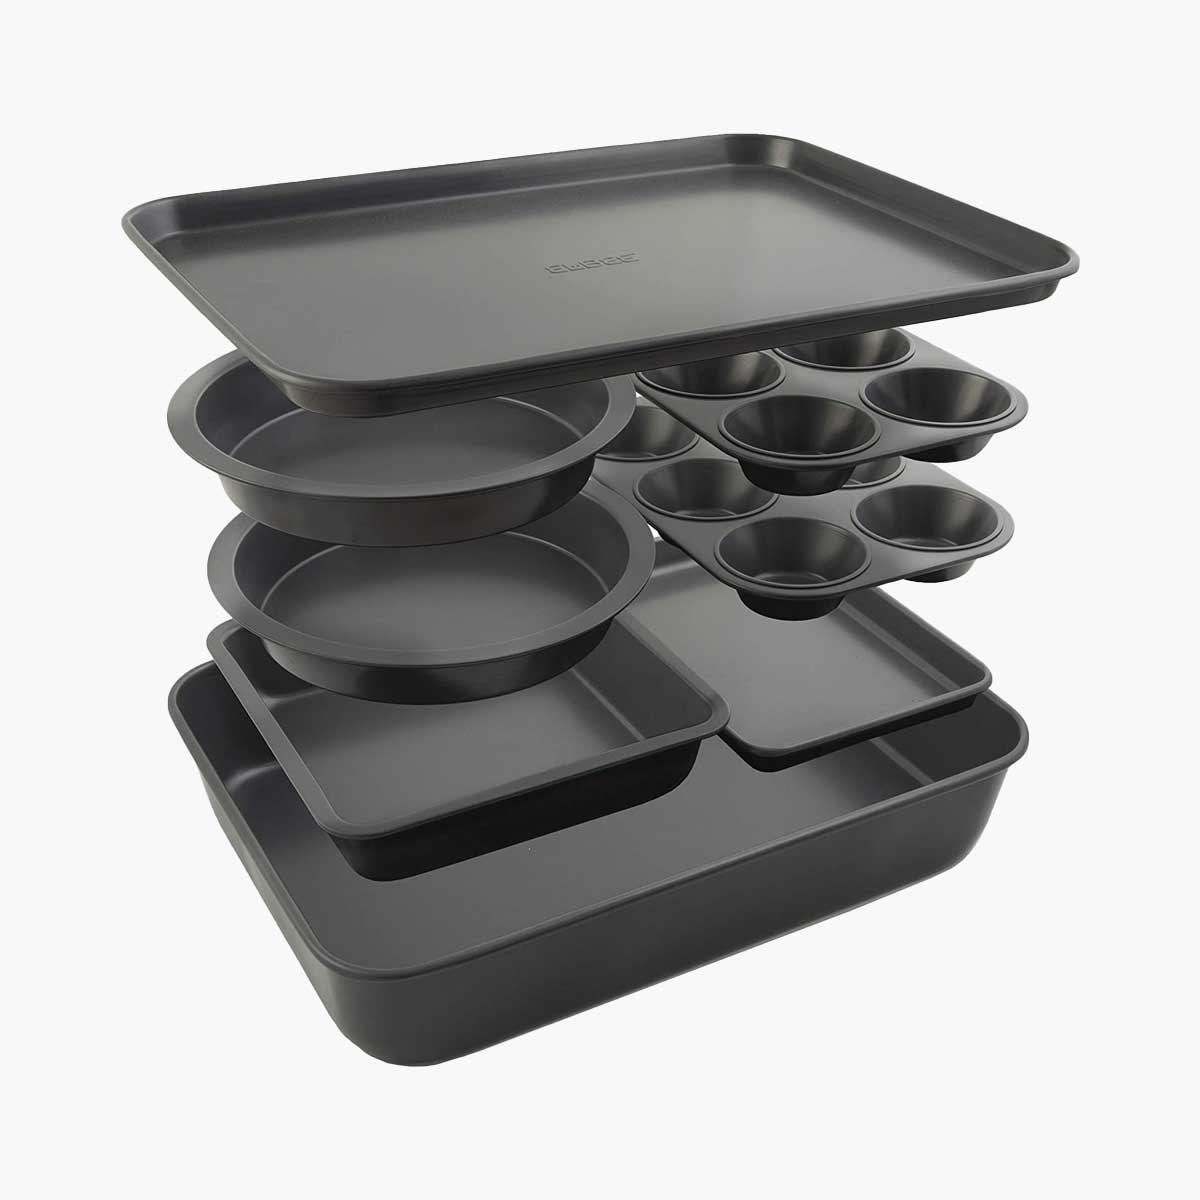 An Elbee baking set, one of Oprah's 12 favorite kitchen gifts for 2021.